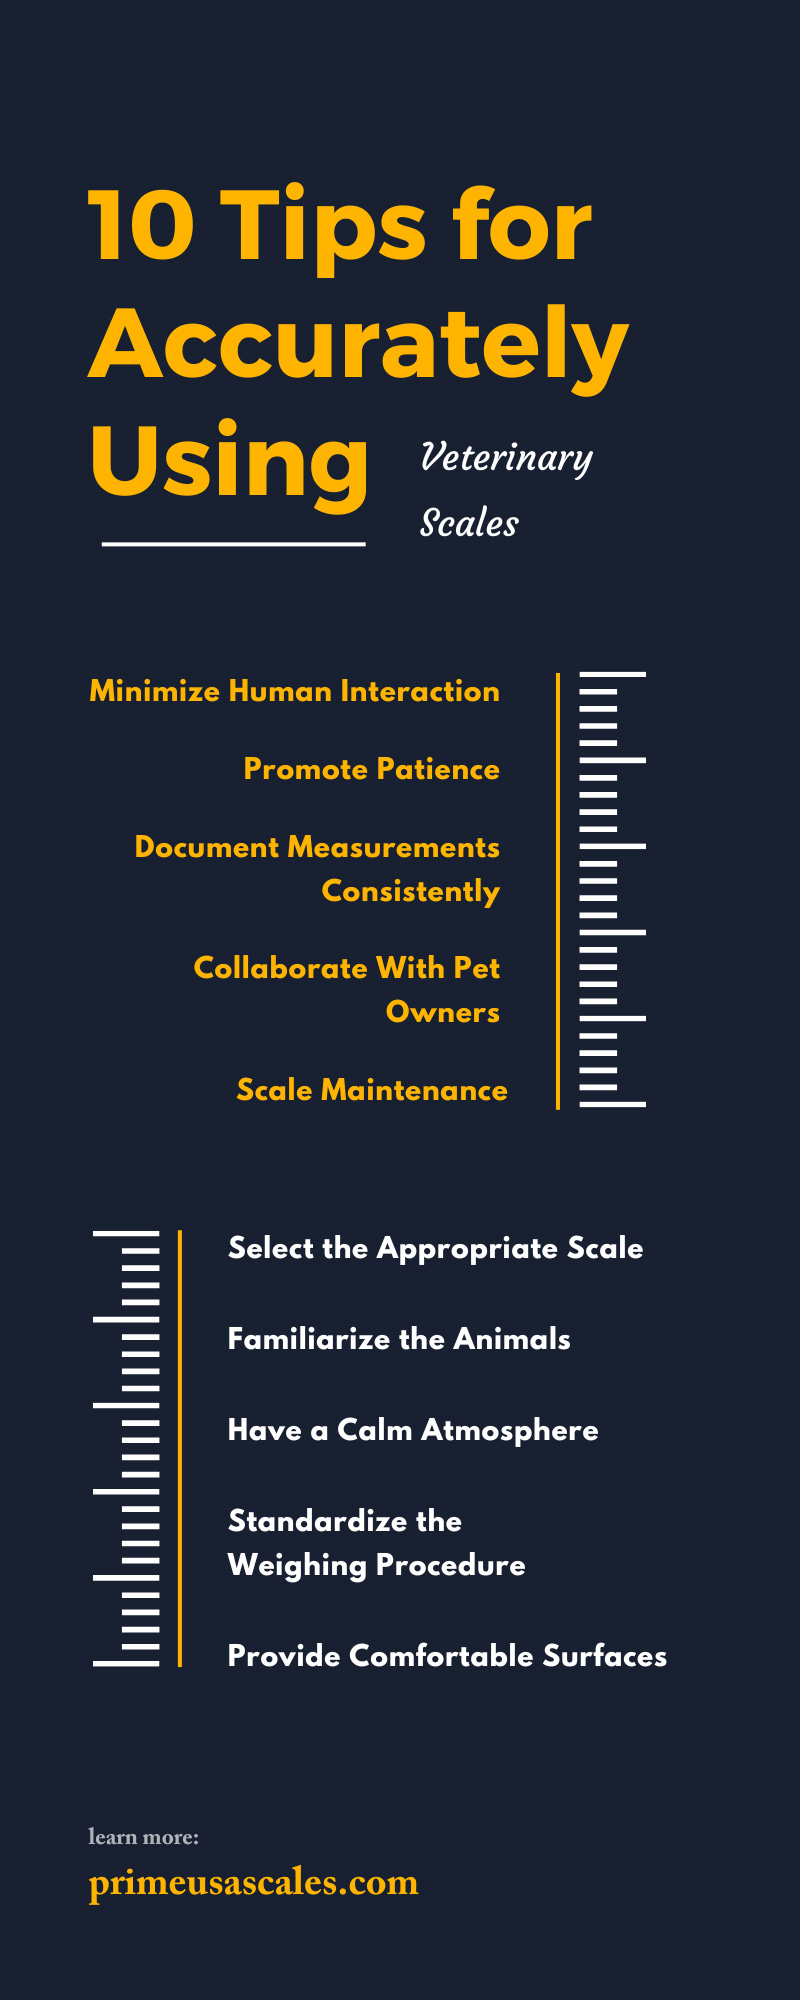 10 Tips for Accurately Using Veterinary Scales